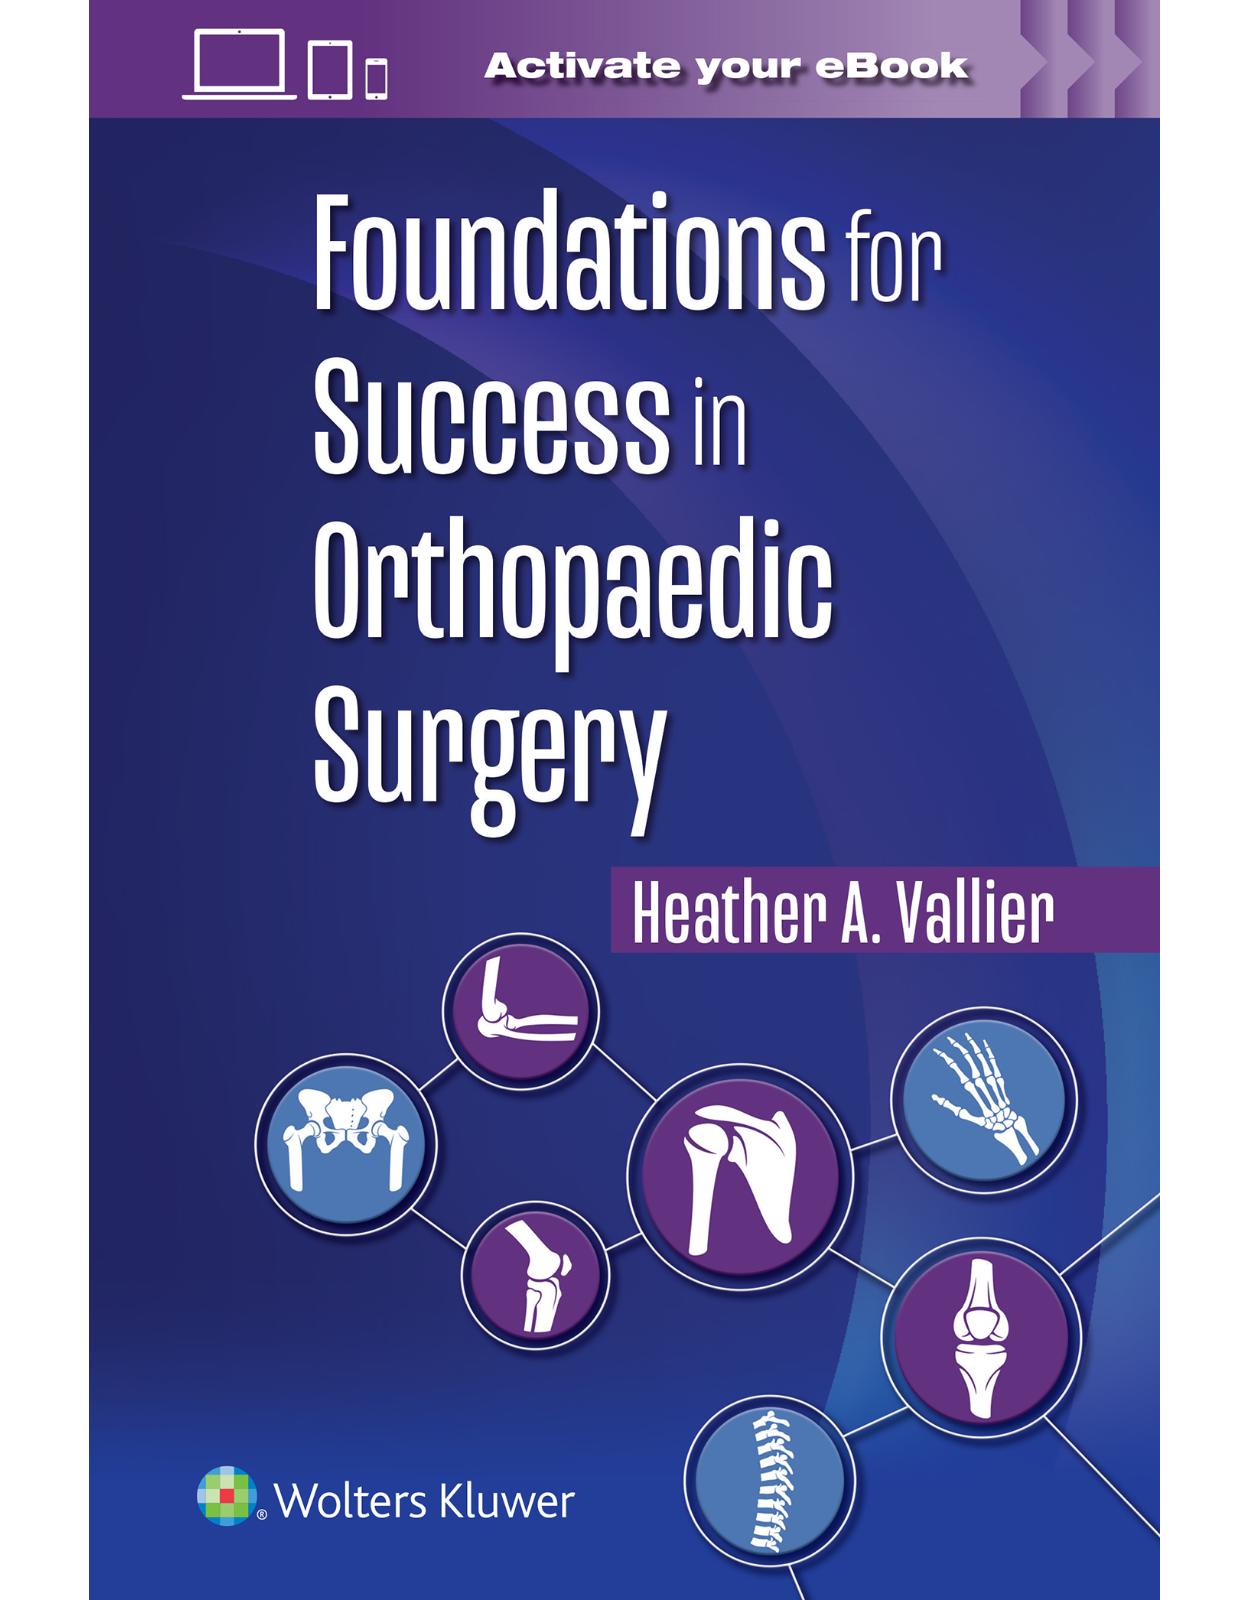 Foundations for Success in Orthopaedic Surgery